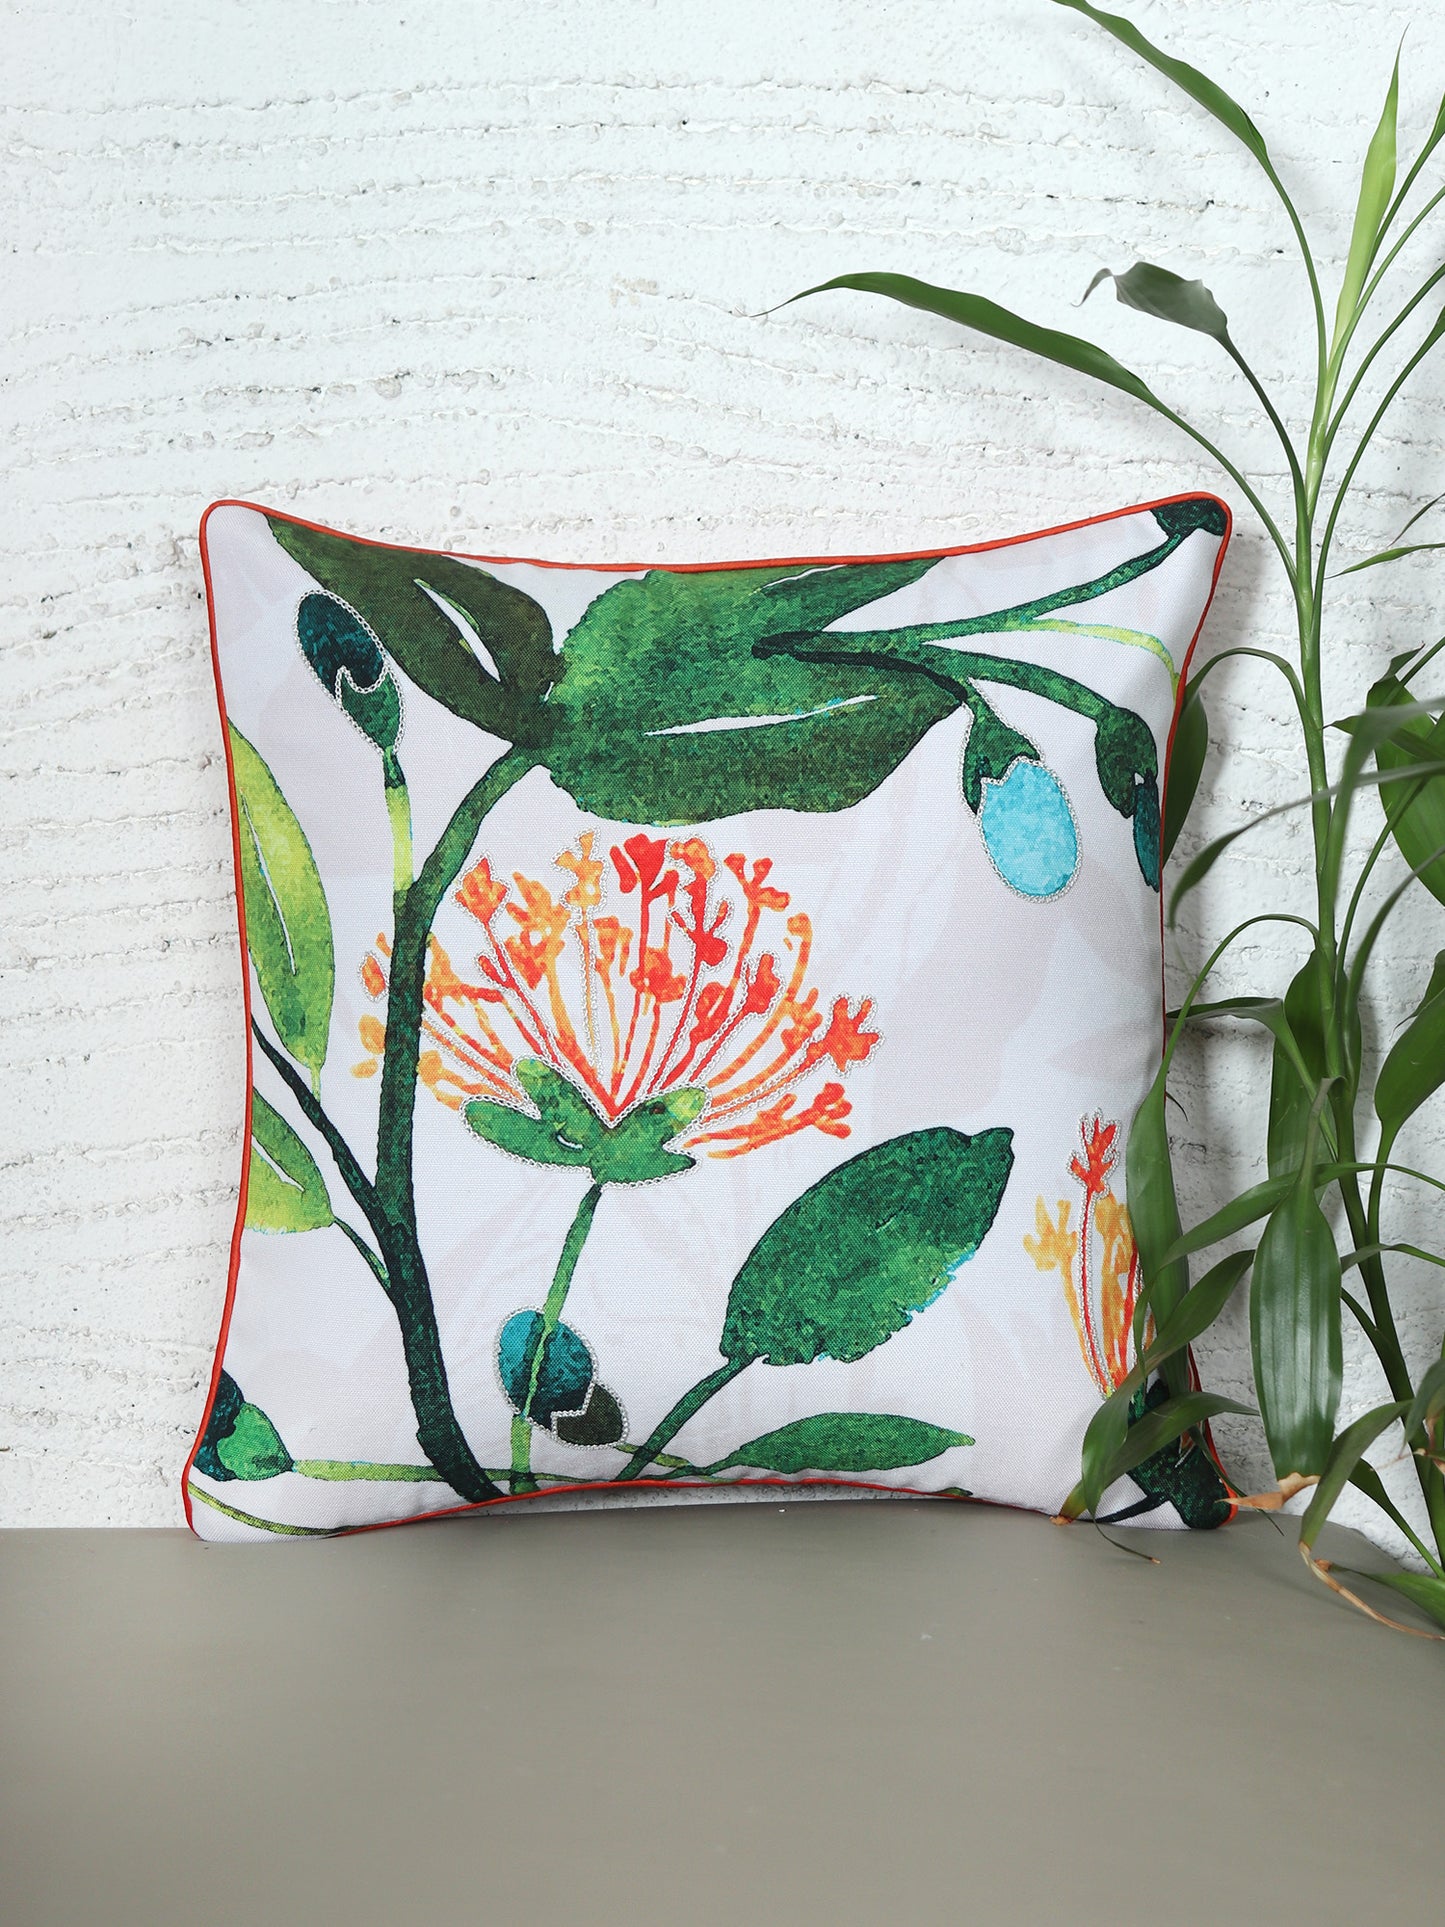 Cushion Cover for Sofa, Bed | Cotton Polyester| Floral Design | Hand Embroidery with Cord Piping | Multicolor - 16x16in(40x40cm) (Pack of 1)